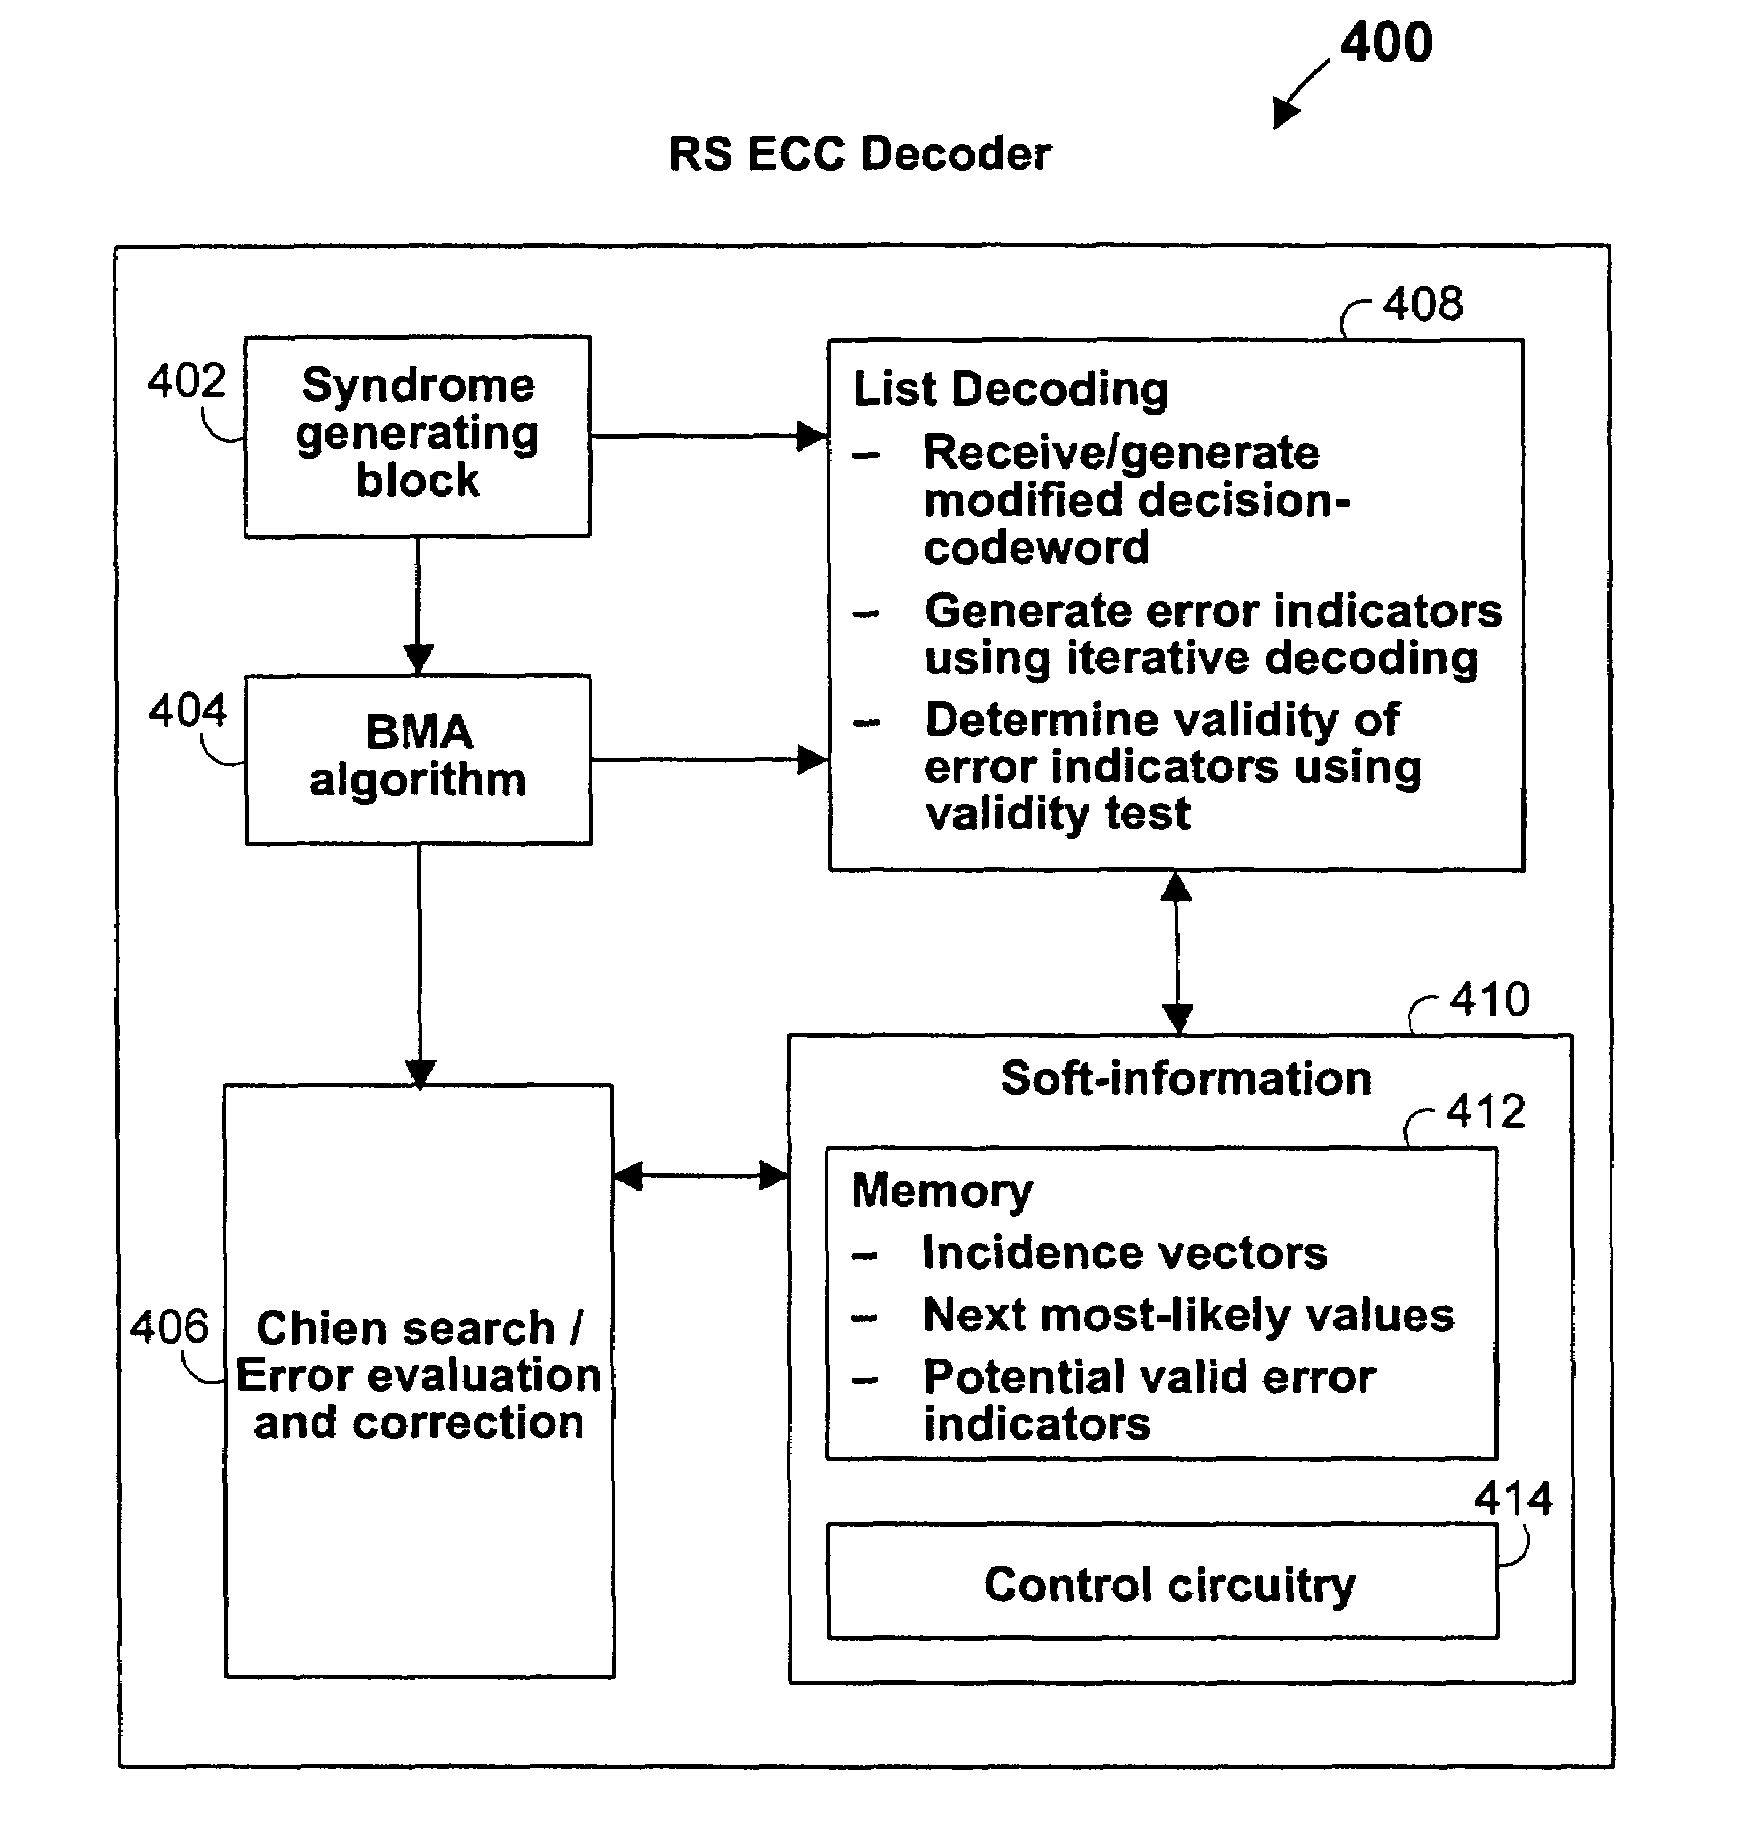 Architecture and control of reed-solomon list decoding